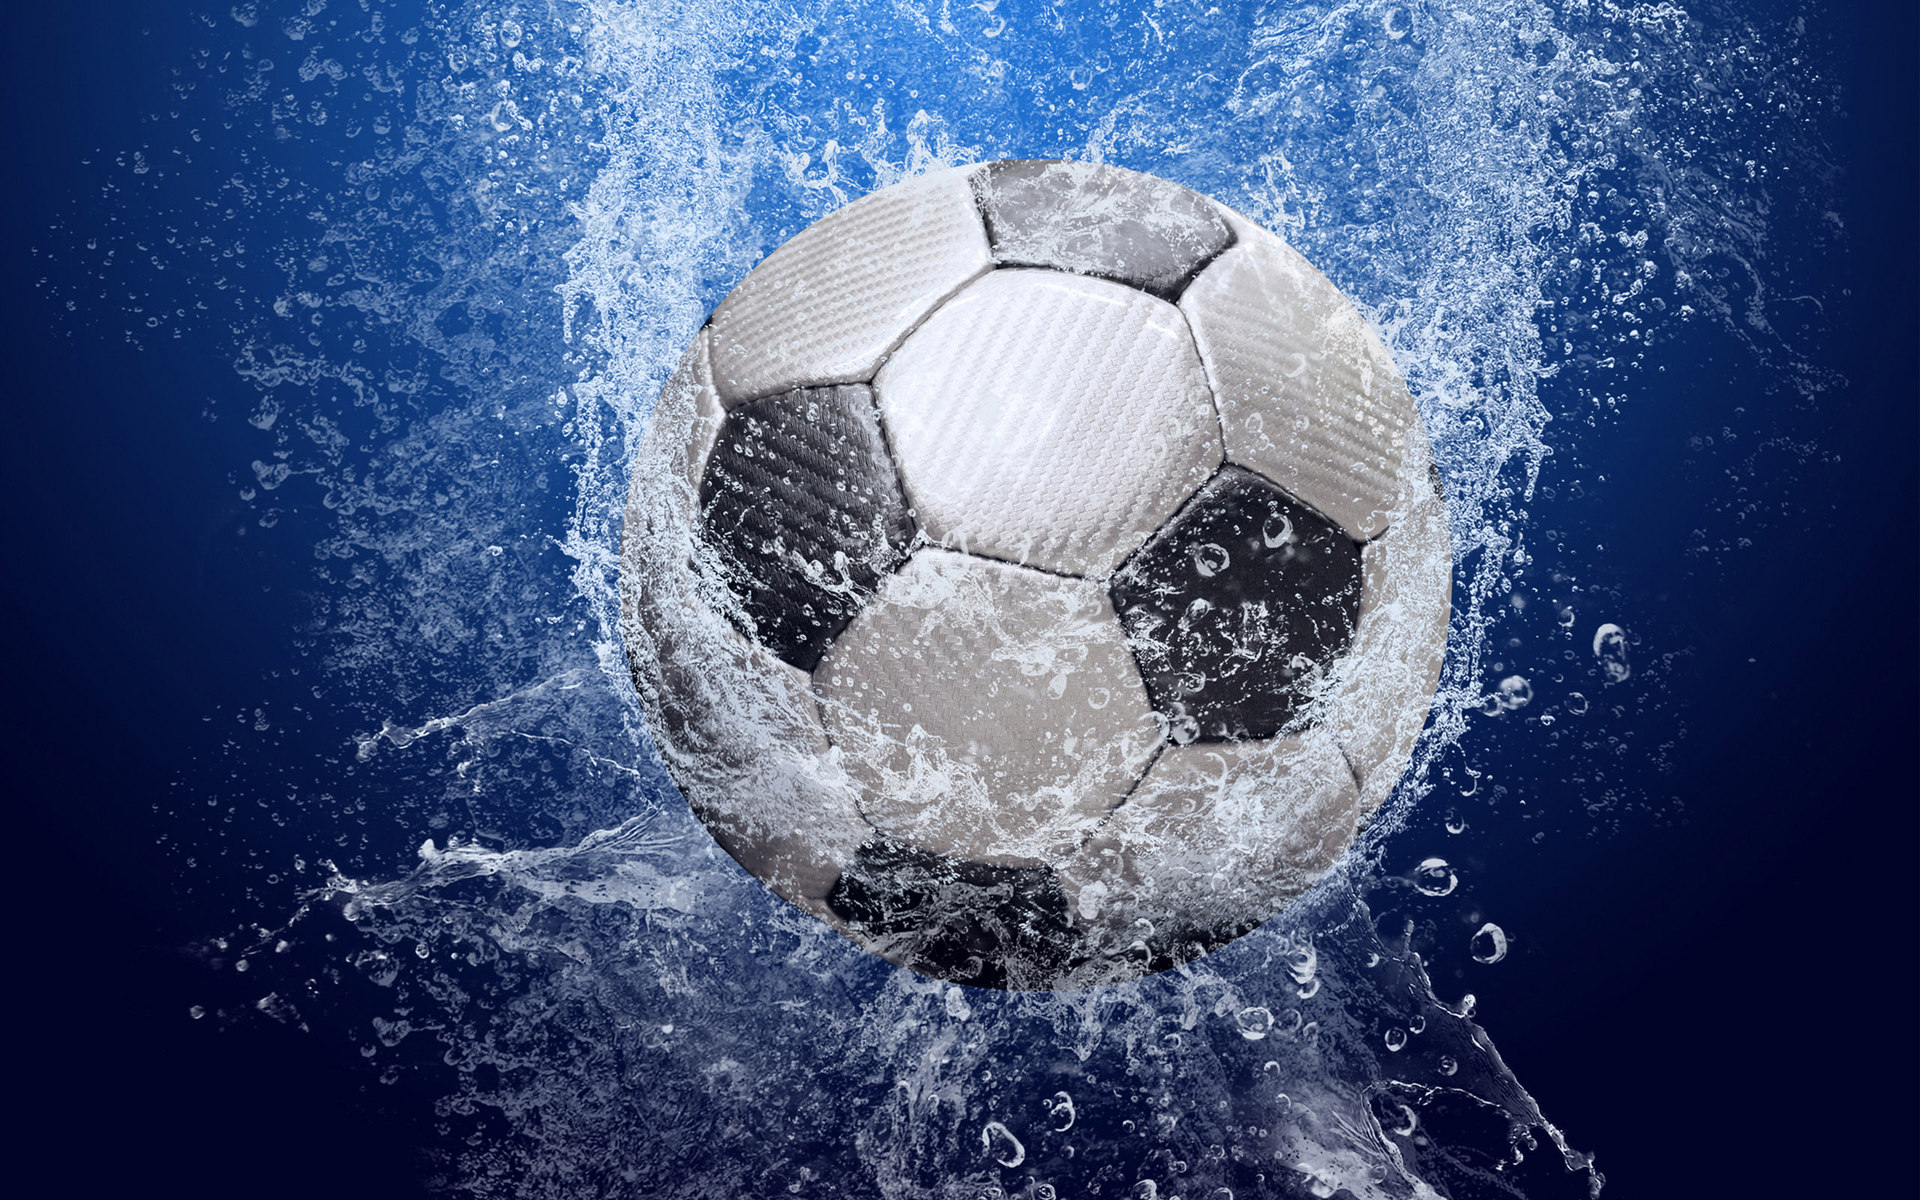 Cool Soccer HD Background